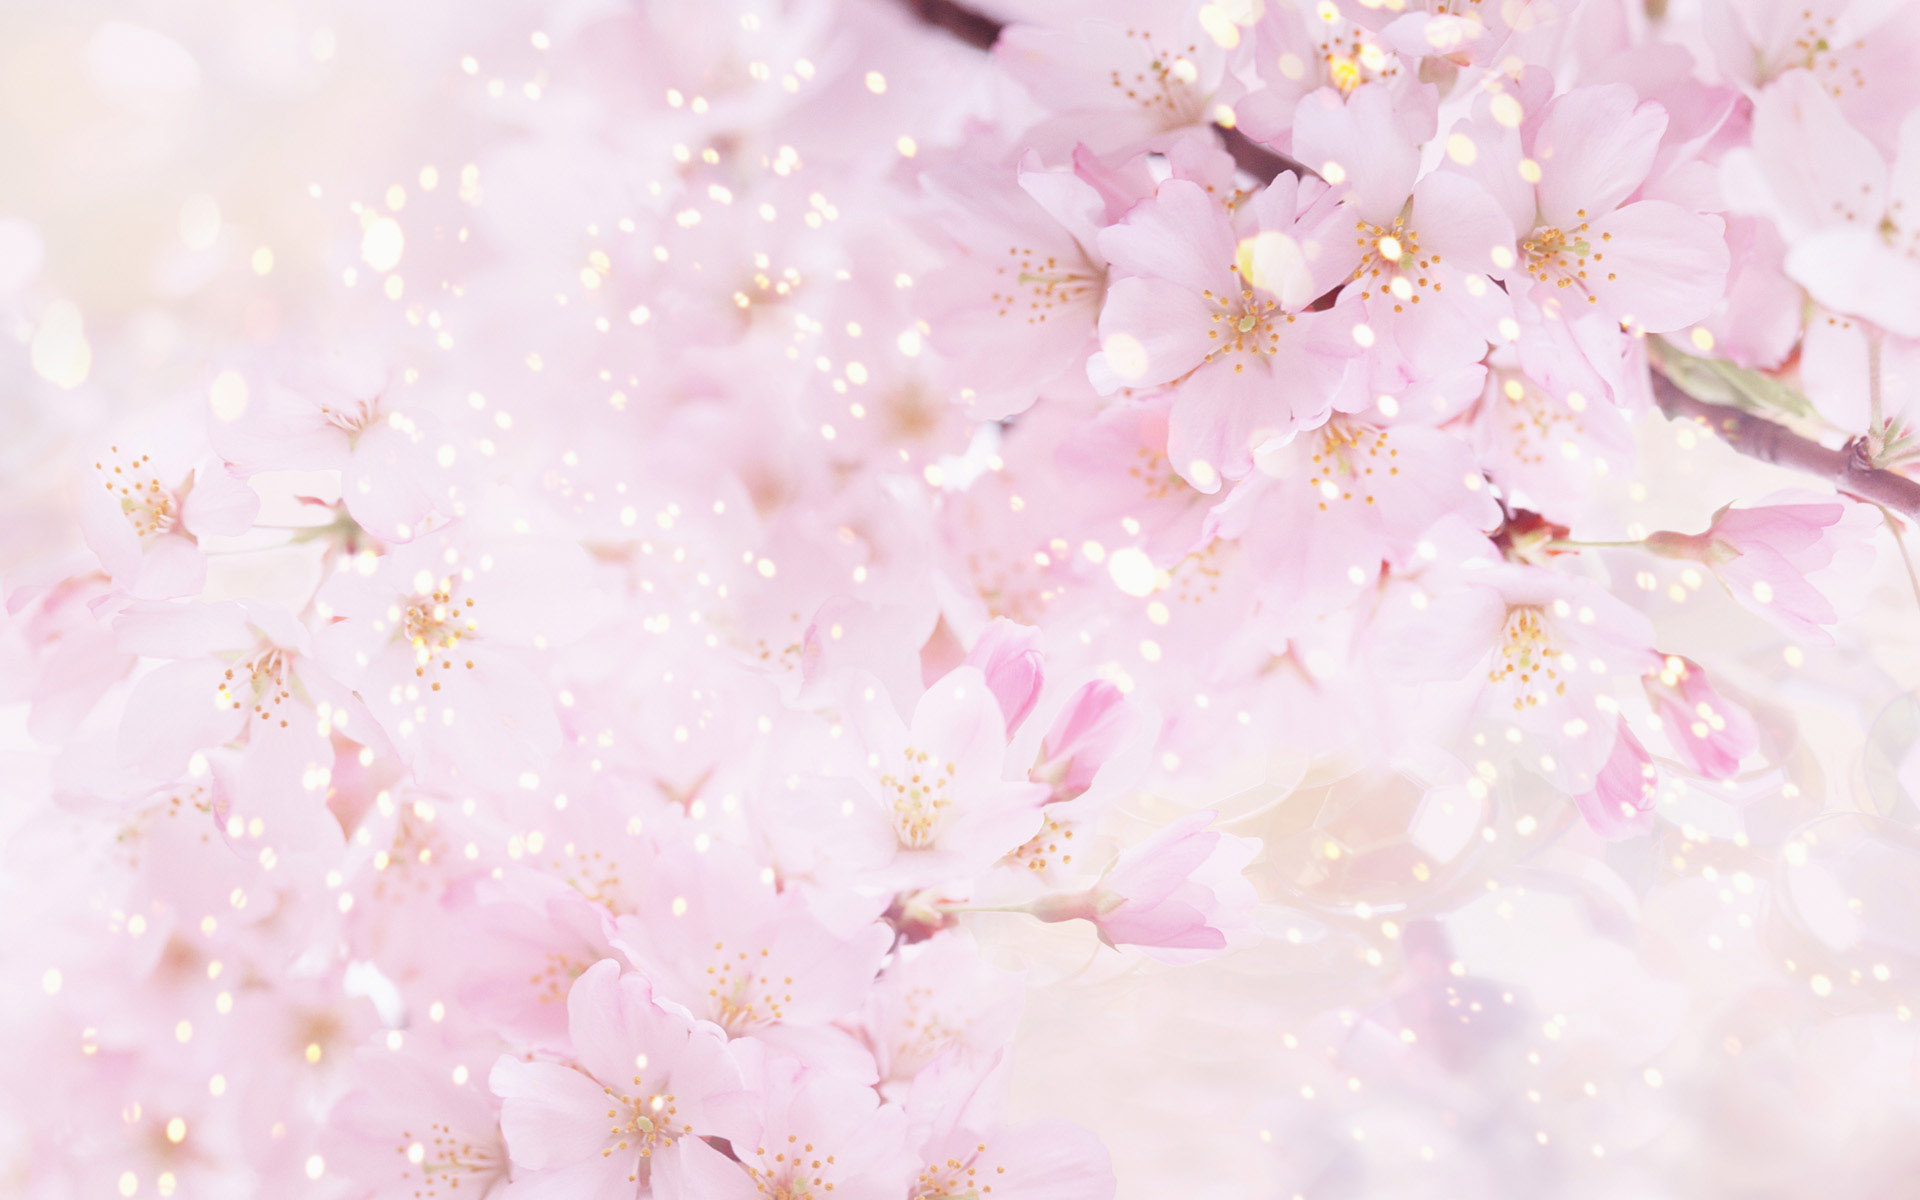 Beautiful flowers background 1920x1200 Wallpapers 1920x1200